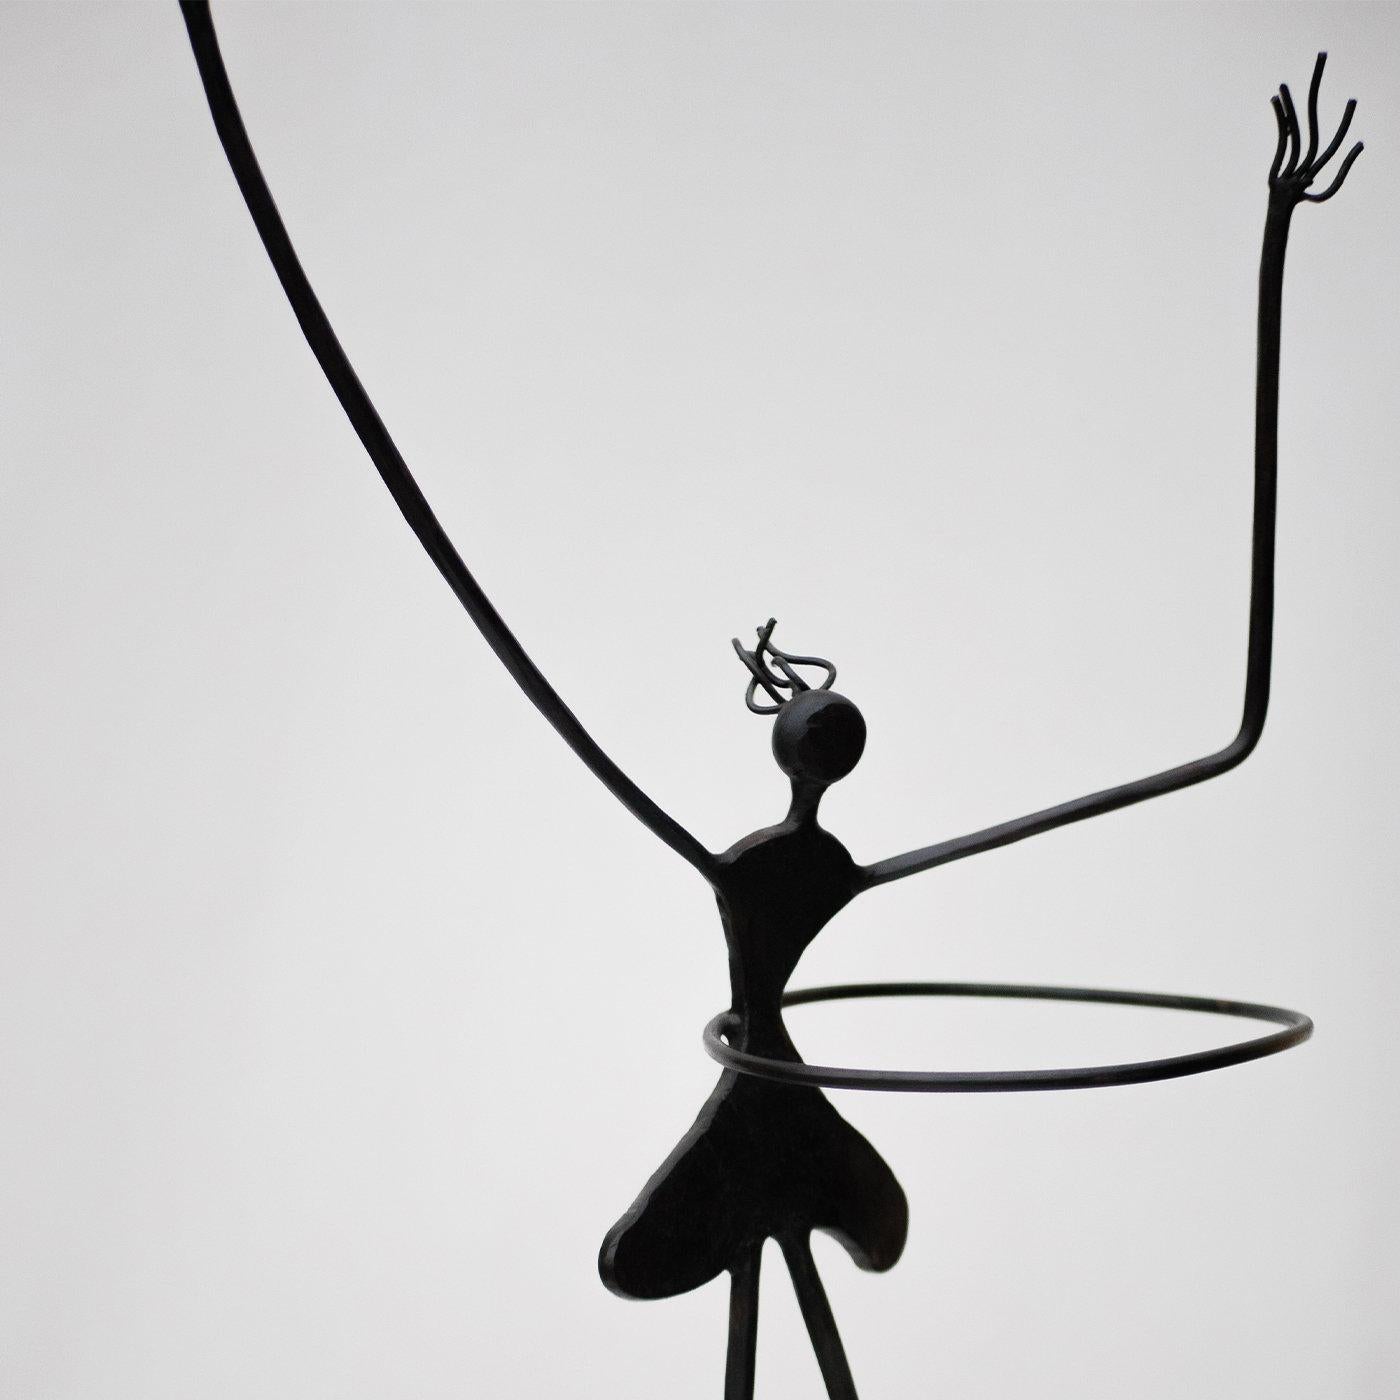 This delightful sculpture deftly handcrafted from wrought iron proves that grace is not a synonym for perfection. Harmony can be found in disproportionate volumes if part of a thoughtful picture, as in this enchanting female dancer (